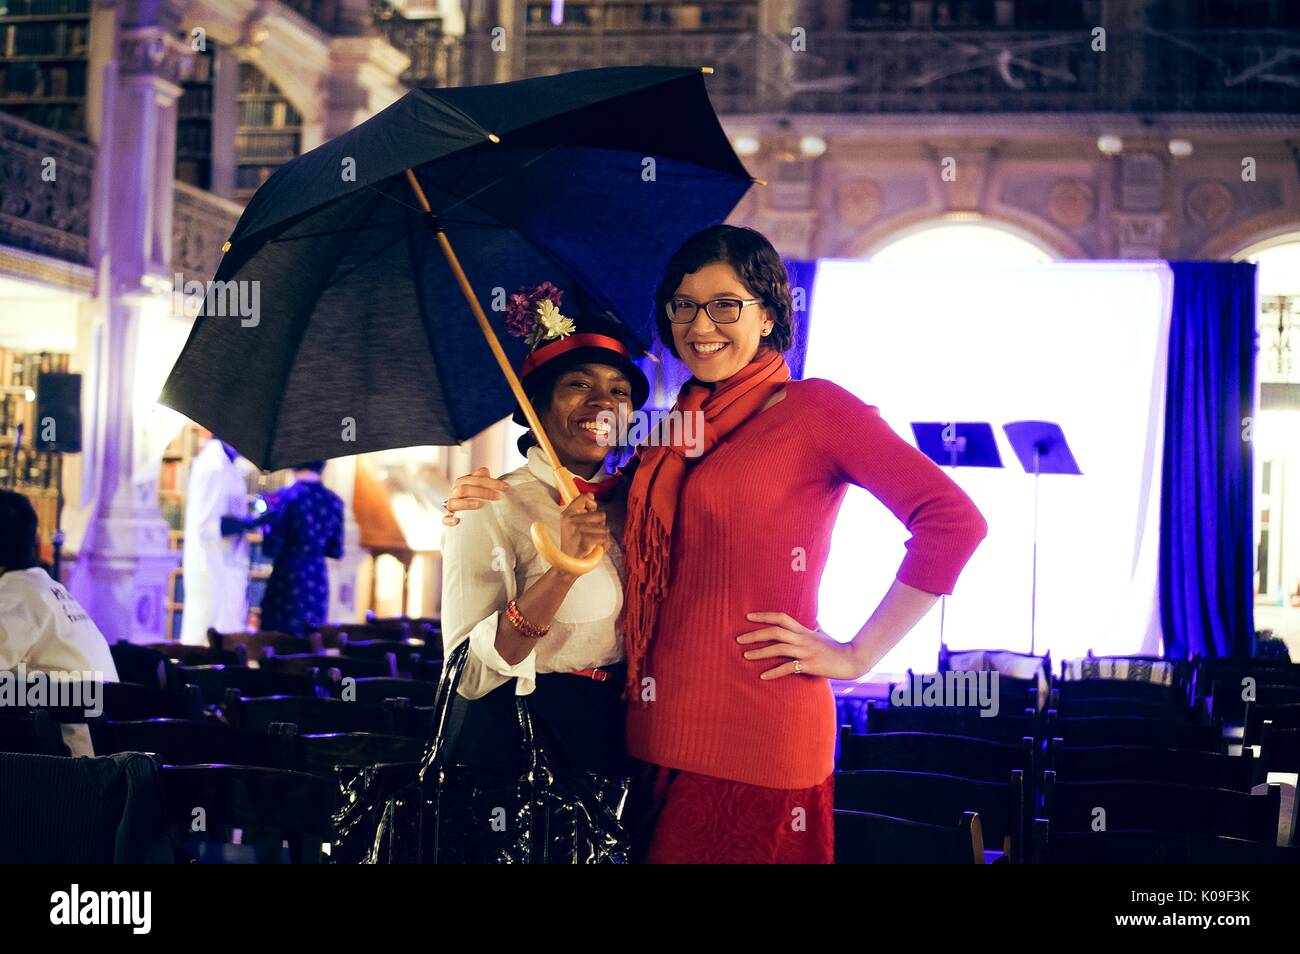 Two female students; the student on the left wearing a black and red hat and a white button down shirt with a red bowtie, holding an umbrella; the student on the right wearing all red; smiling facial expressions, Halloween at Peabody, October 31, 2015. Courtesy Eric Chen. Stock Photo